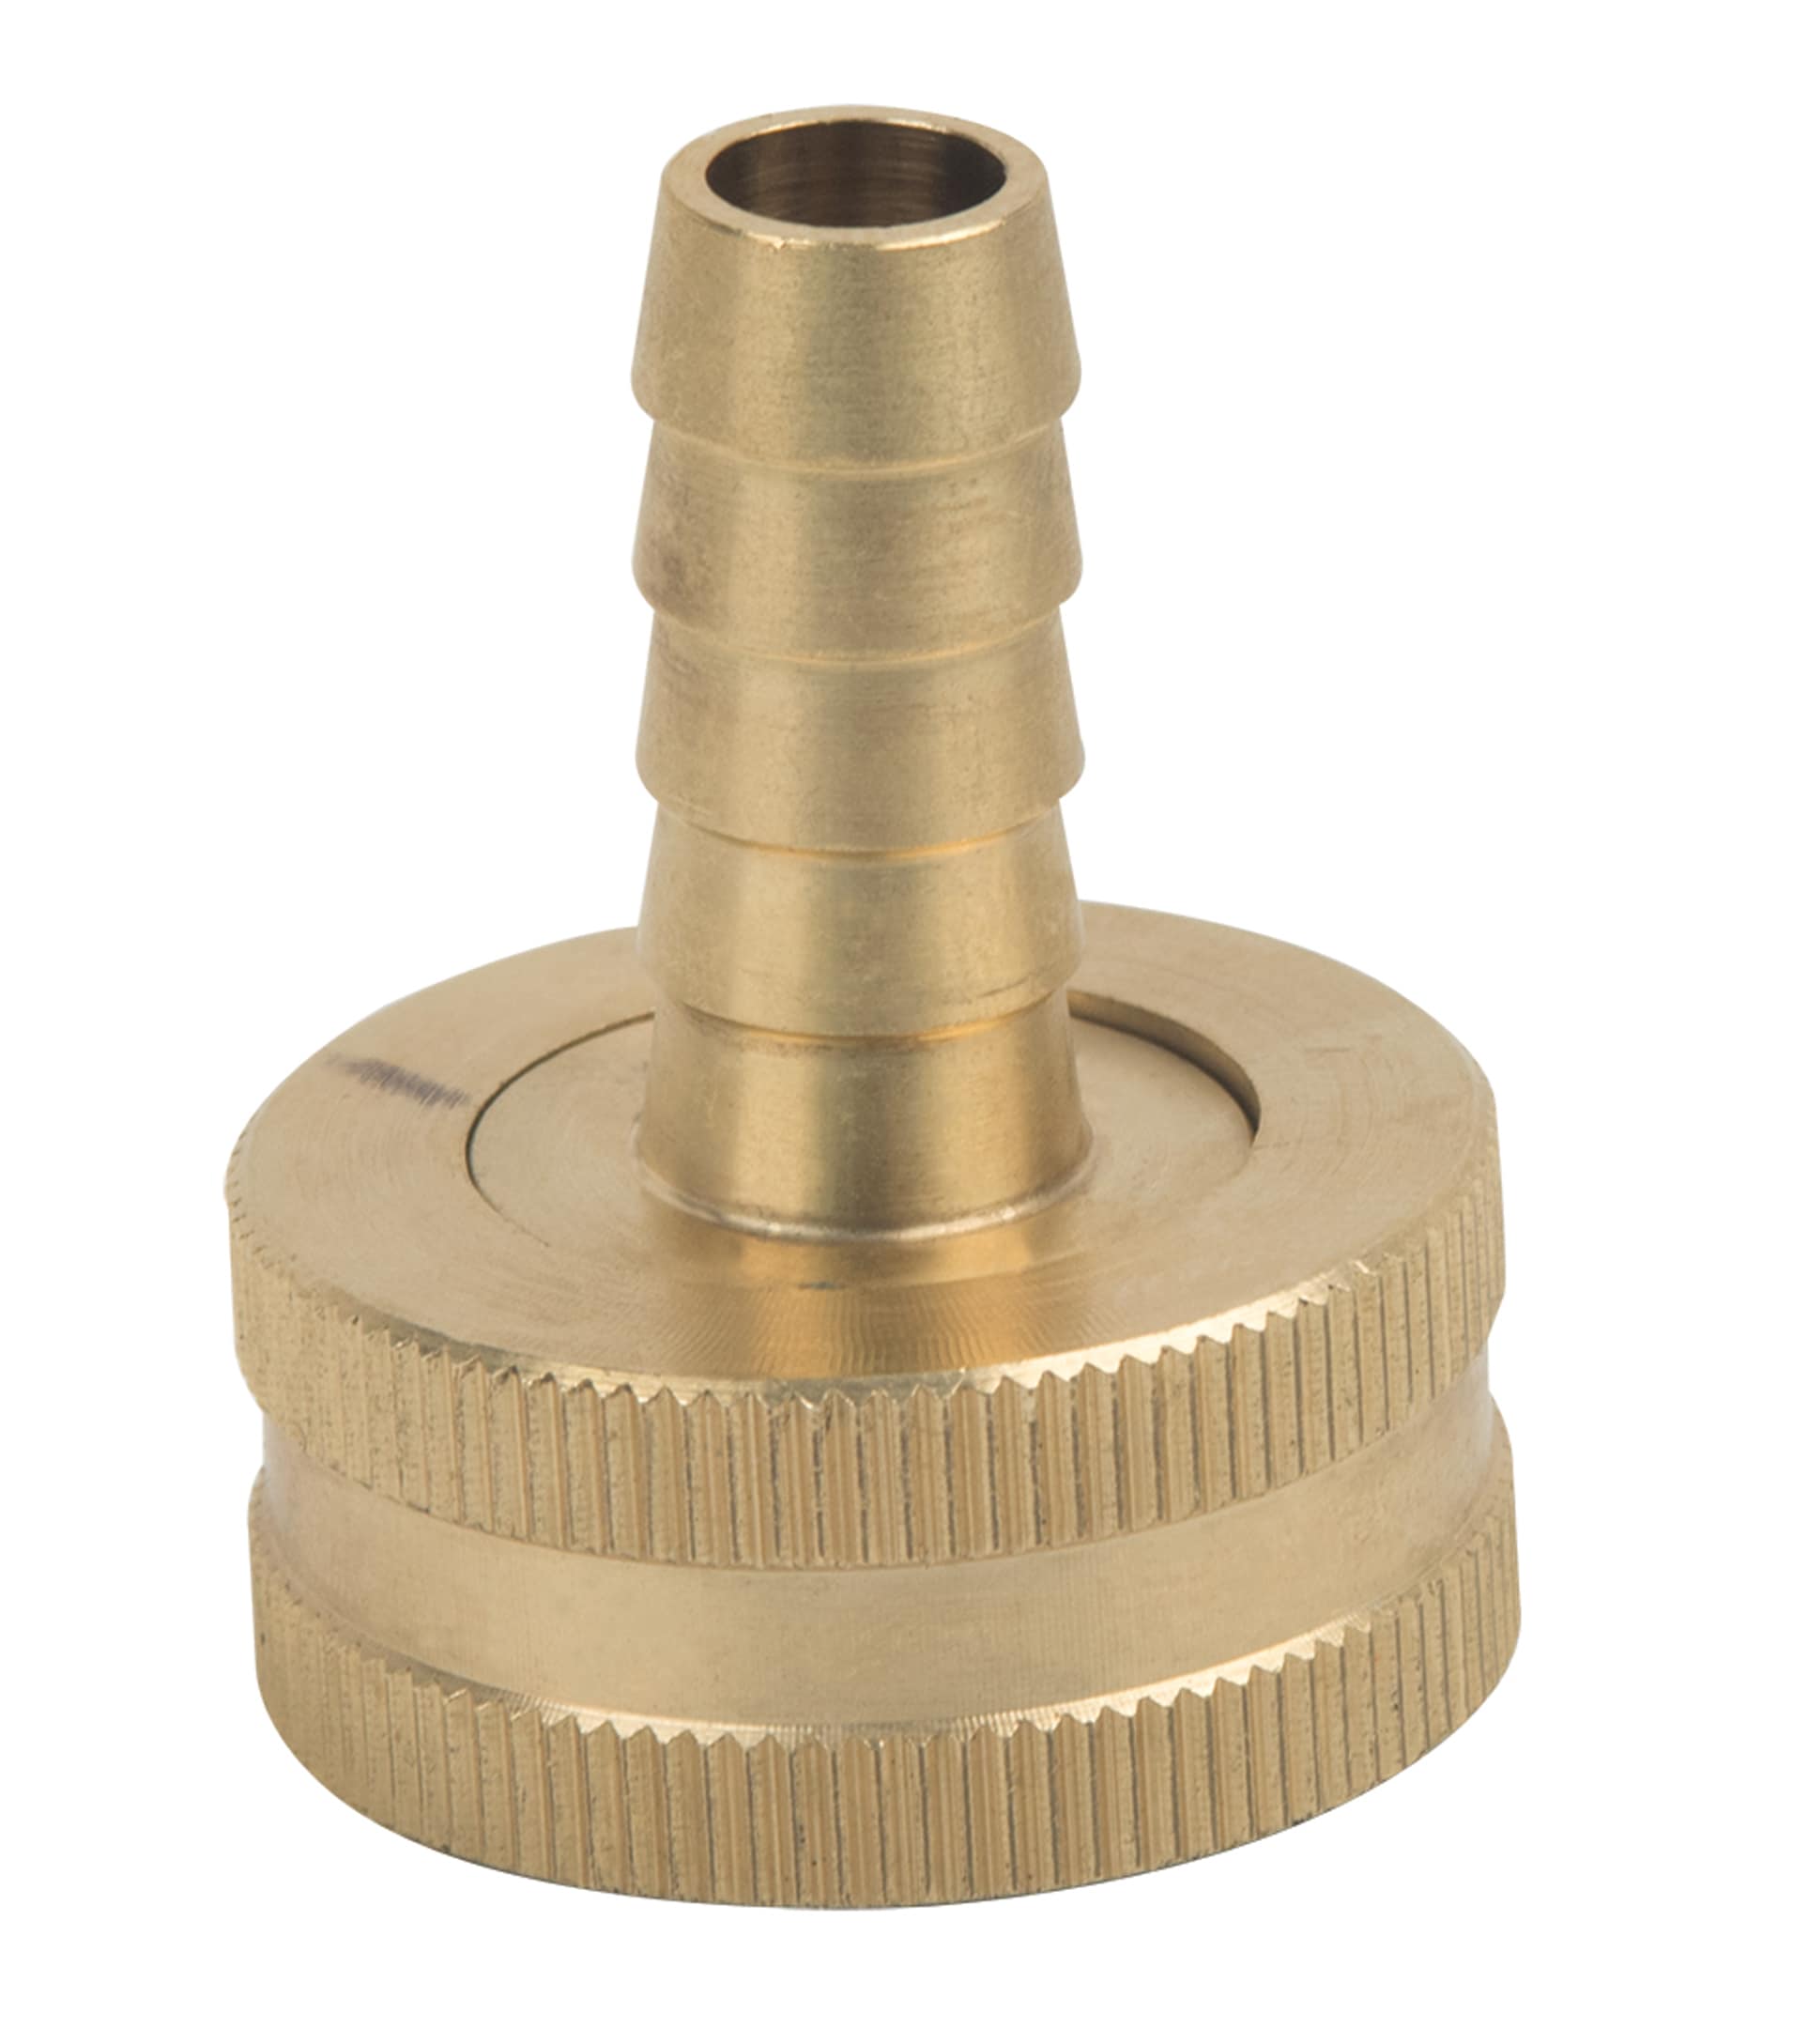 BRASS GARDEN HOSE X 3/8 BARB FGH x 3/8 BARBED ADAPTER 